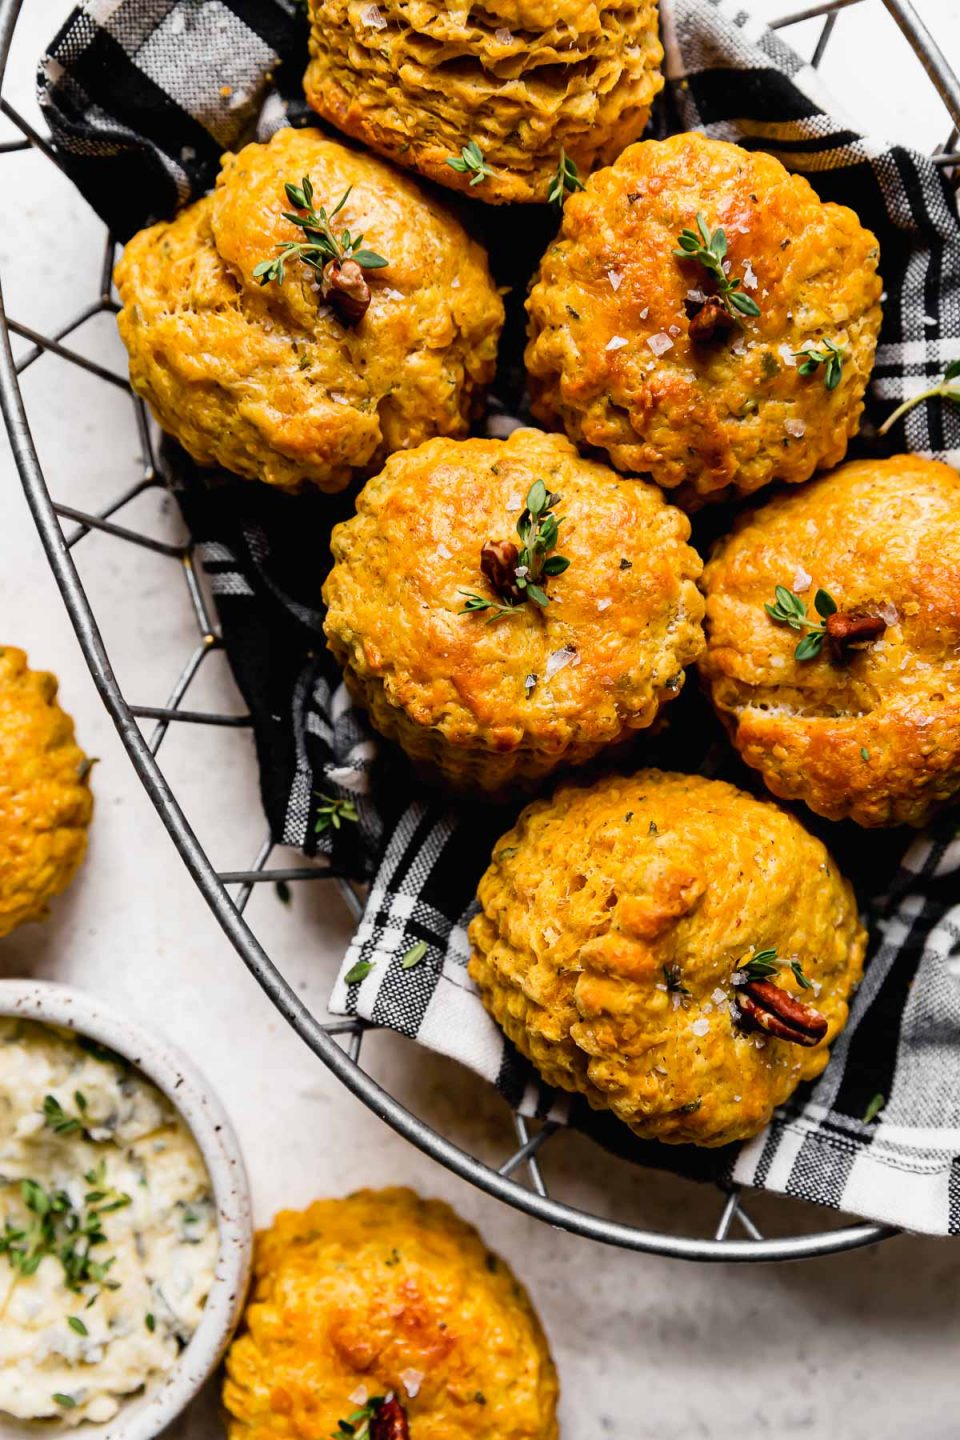 Pumpkin biscuits, decorated like pumpkins with a pecan & fresh herbs inserted into the tops, shown in a wire basket lined with a black plaid napkin. The basket sits atop a white surface next to a small ceramic bowl with garlic herb butter.